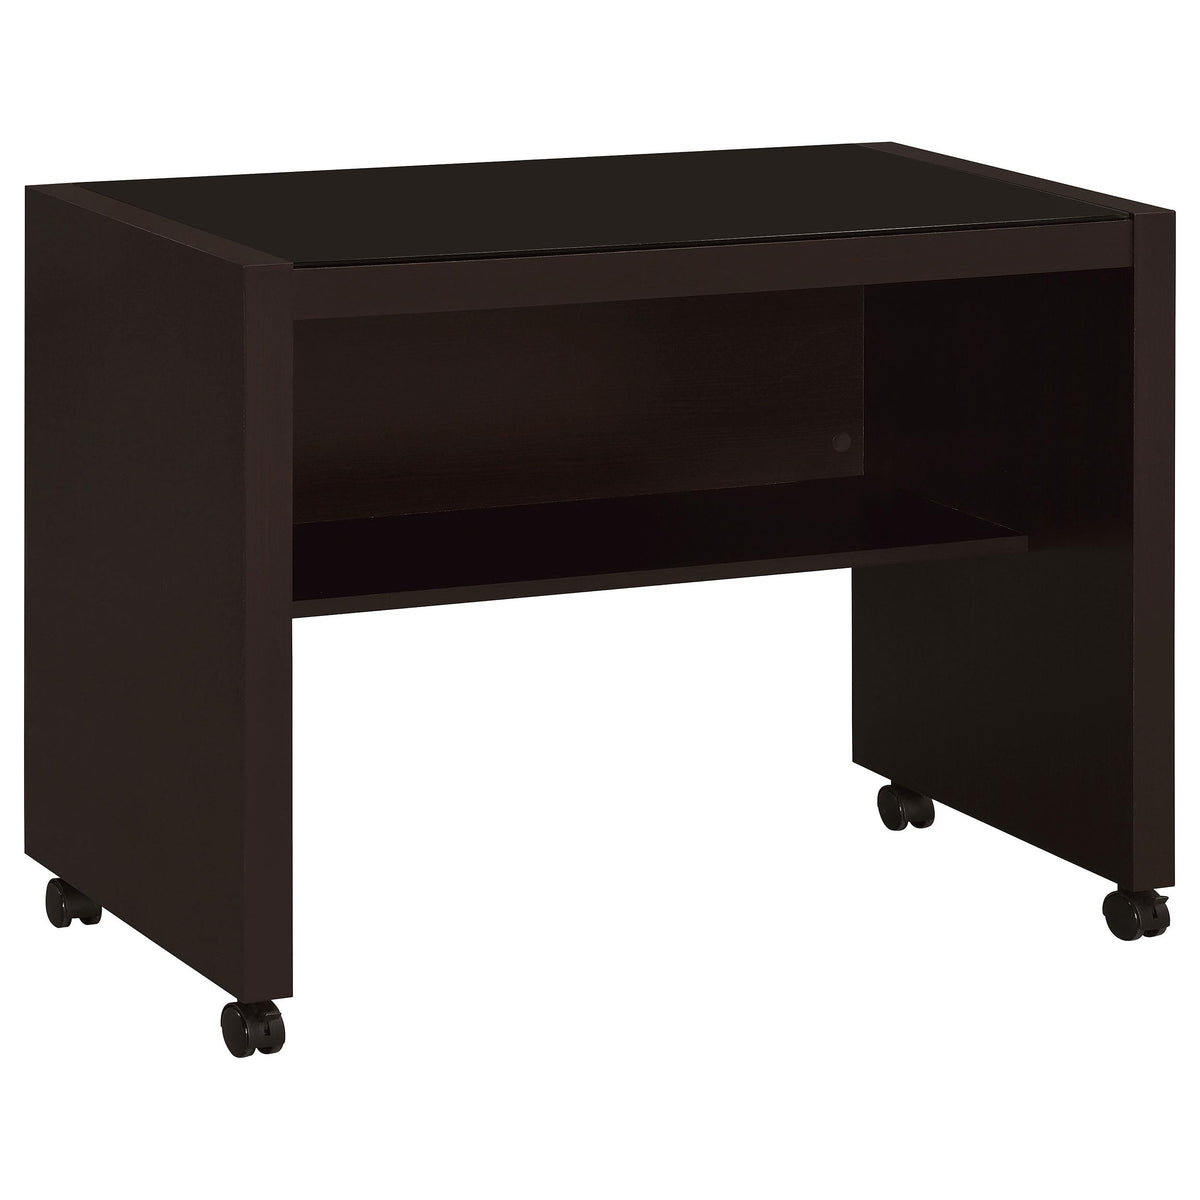 Skeena Mobile Return with Casters Cappuccino  Half Price Furniture